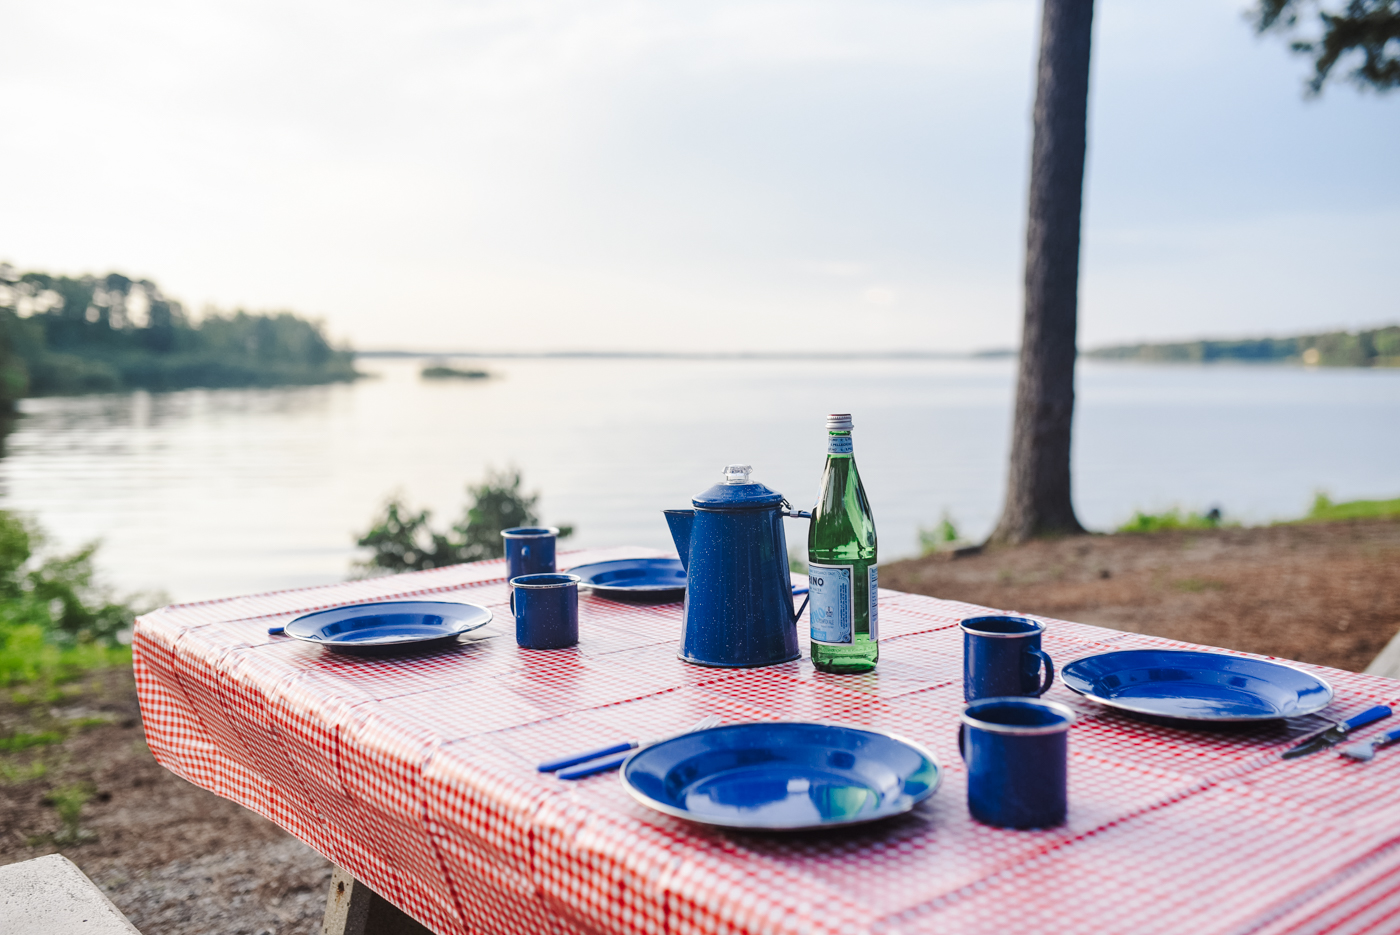 Camping With Kids by popular Memphis lifestyle blog, Lone Star Looking Glass: image of a picnic table covered in a red and white checker tablecloth and set with blue metal dishwater and a bottle of sparkling water. 